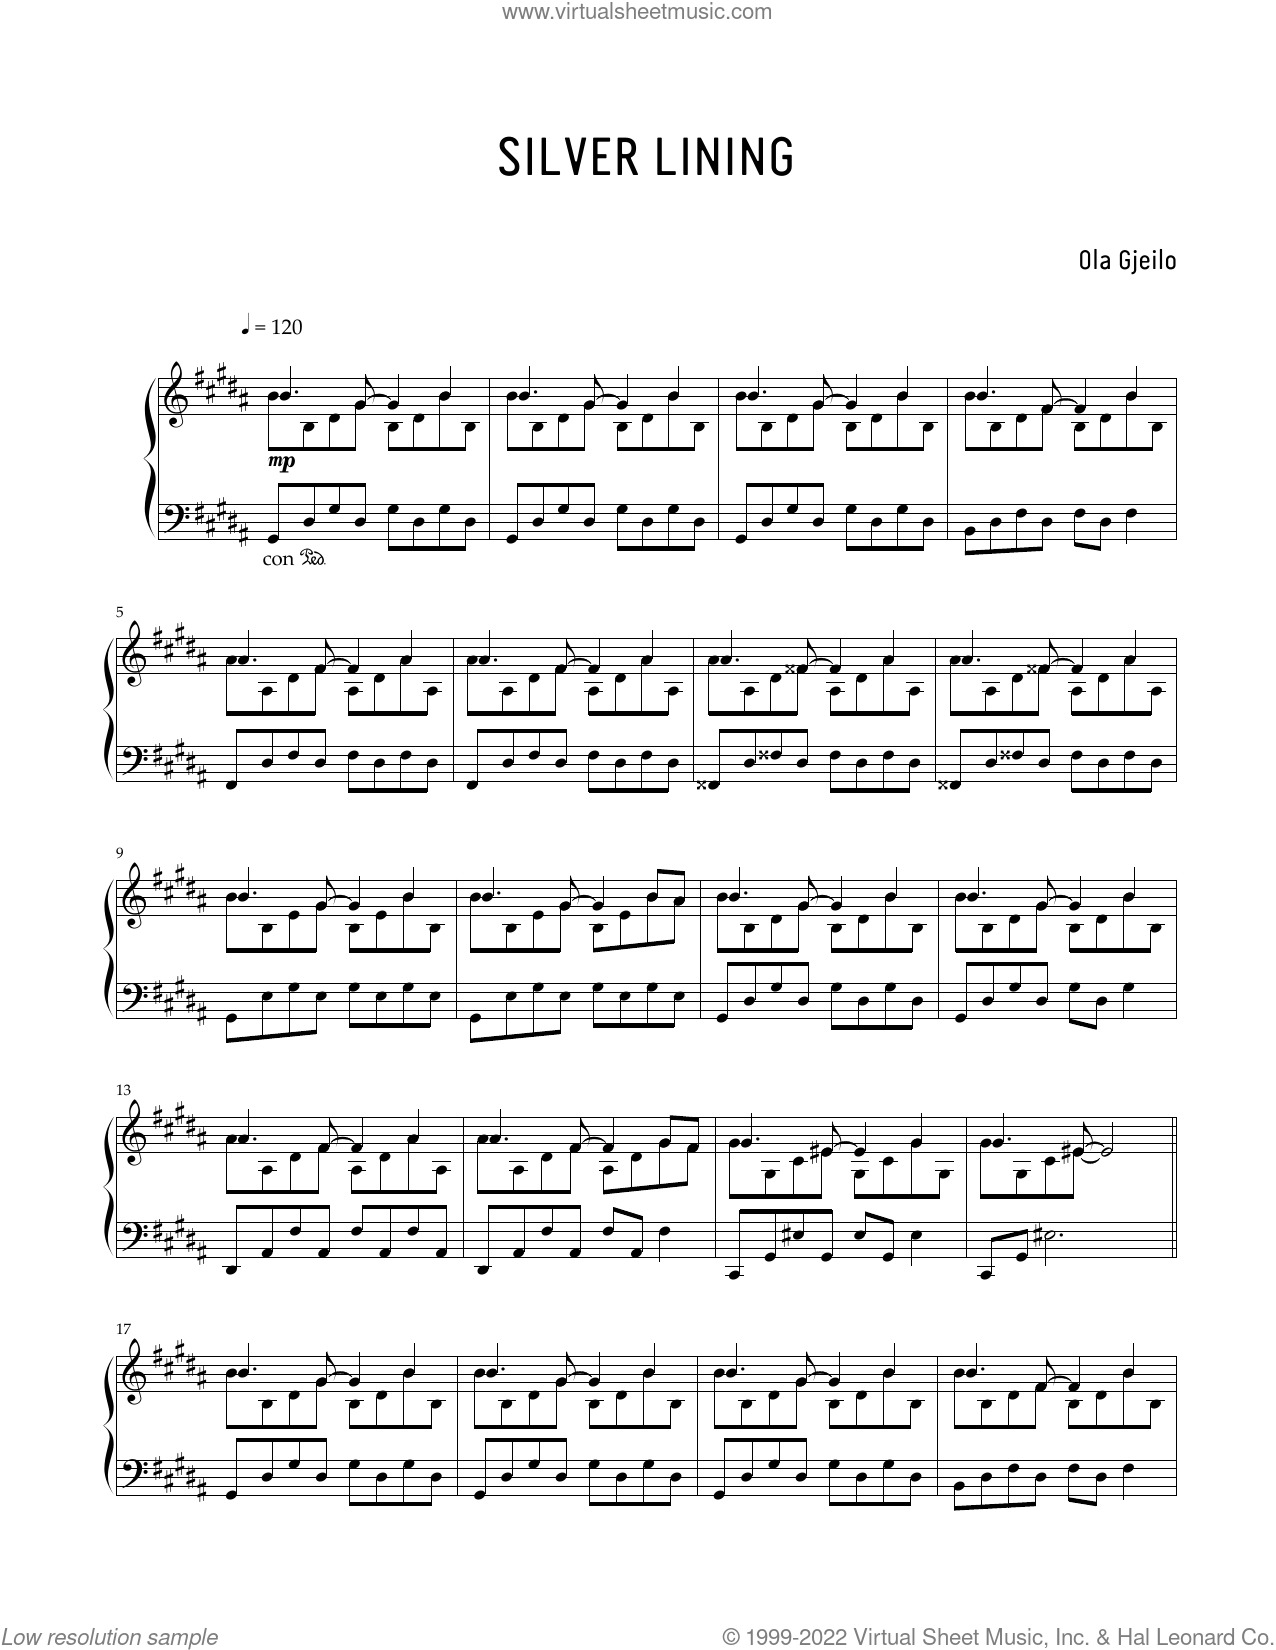 MUSICHELP Silver Tongues Sheet Music (Piano Solo) in A Major - Download &  Print - SKU: MN0266289